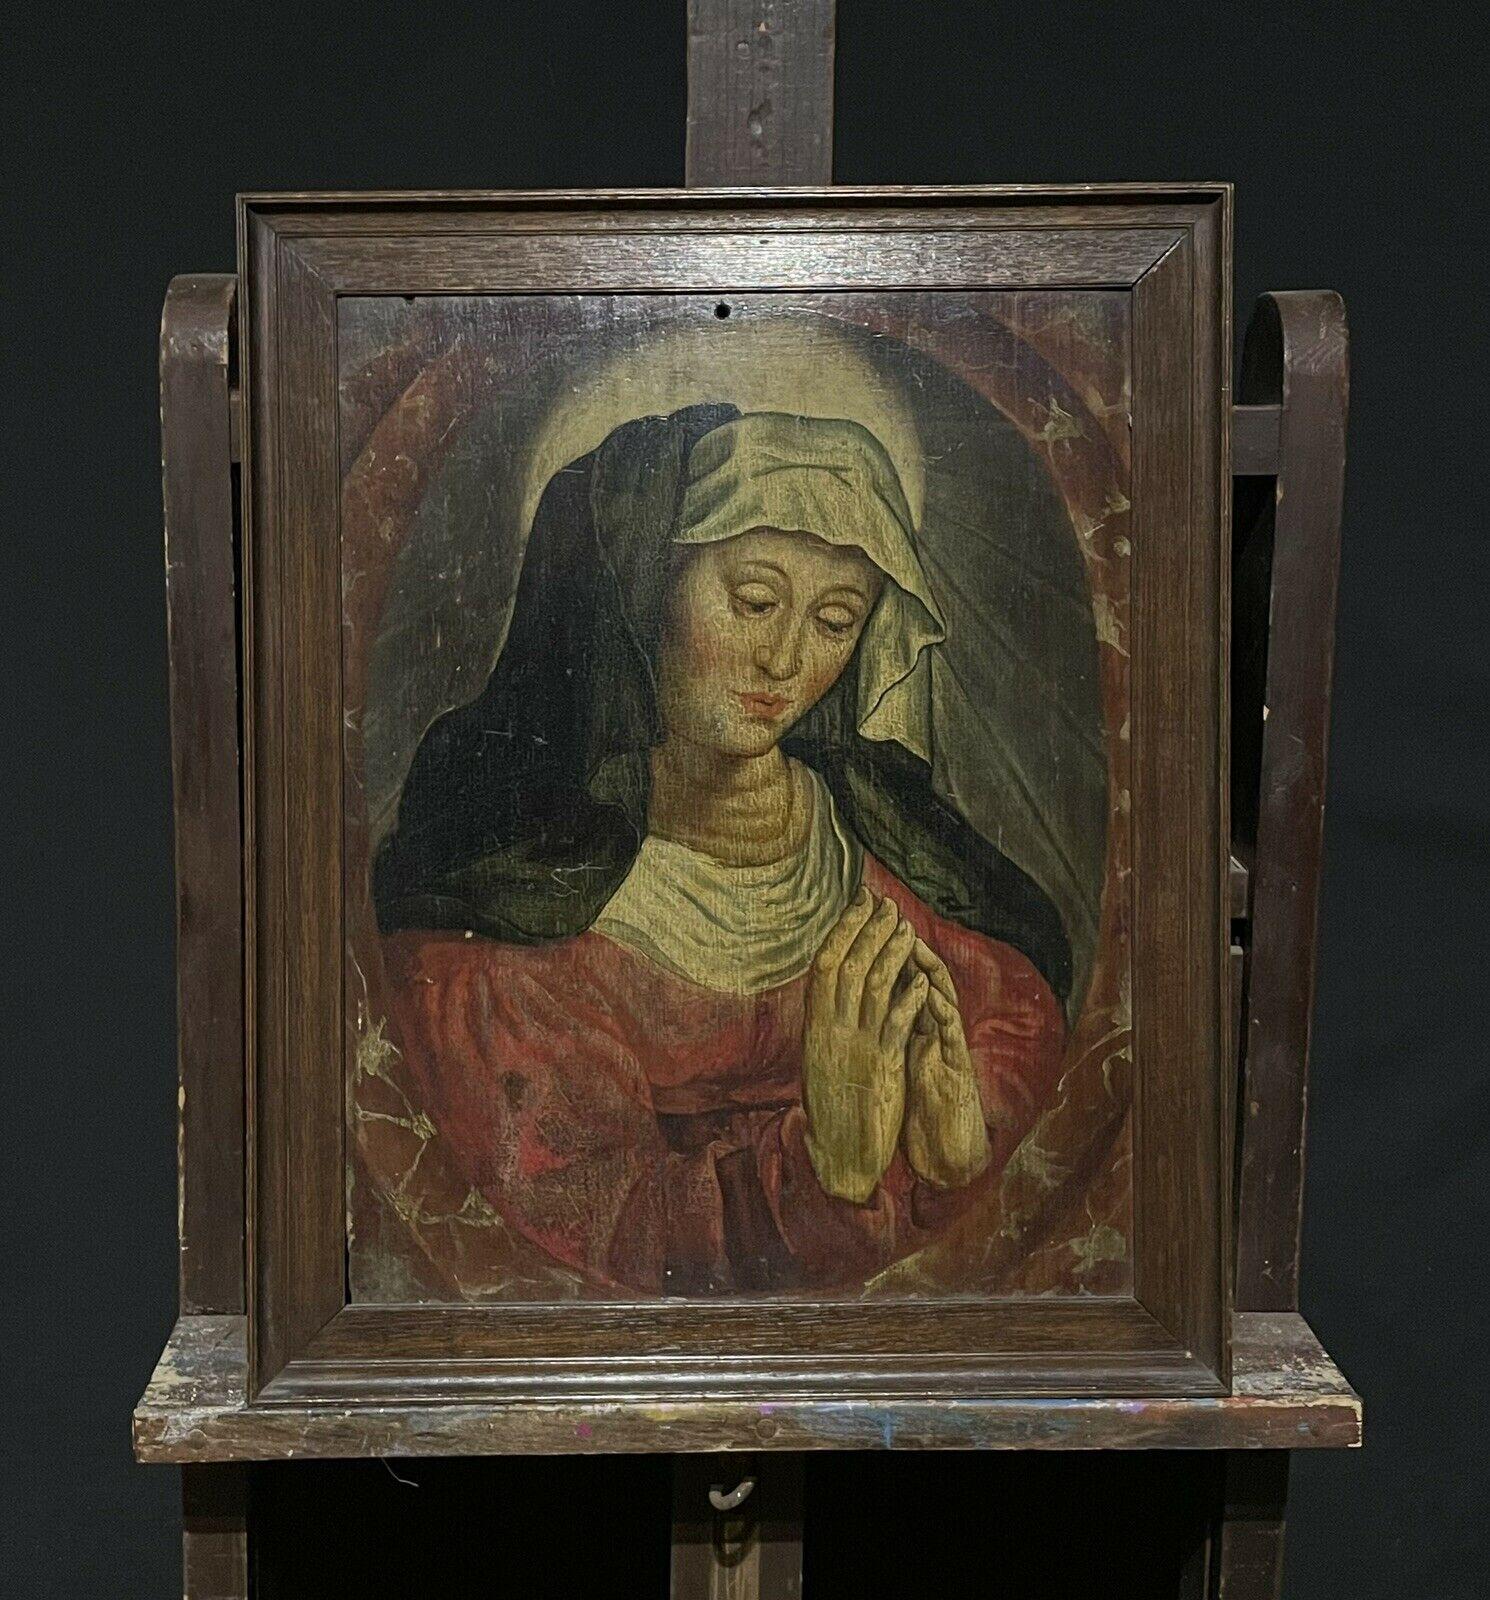 Artist/ School: Italian School, 17th century

Title: The Madonna in Prayer

Medium:   oil painting on wooden panel, framed

Size:

framed:   23.5 x 19.25 inches
panel:   20.5 x 16 inches

Provenance: private collection, France

Condition: The